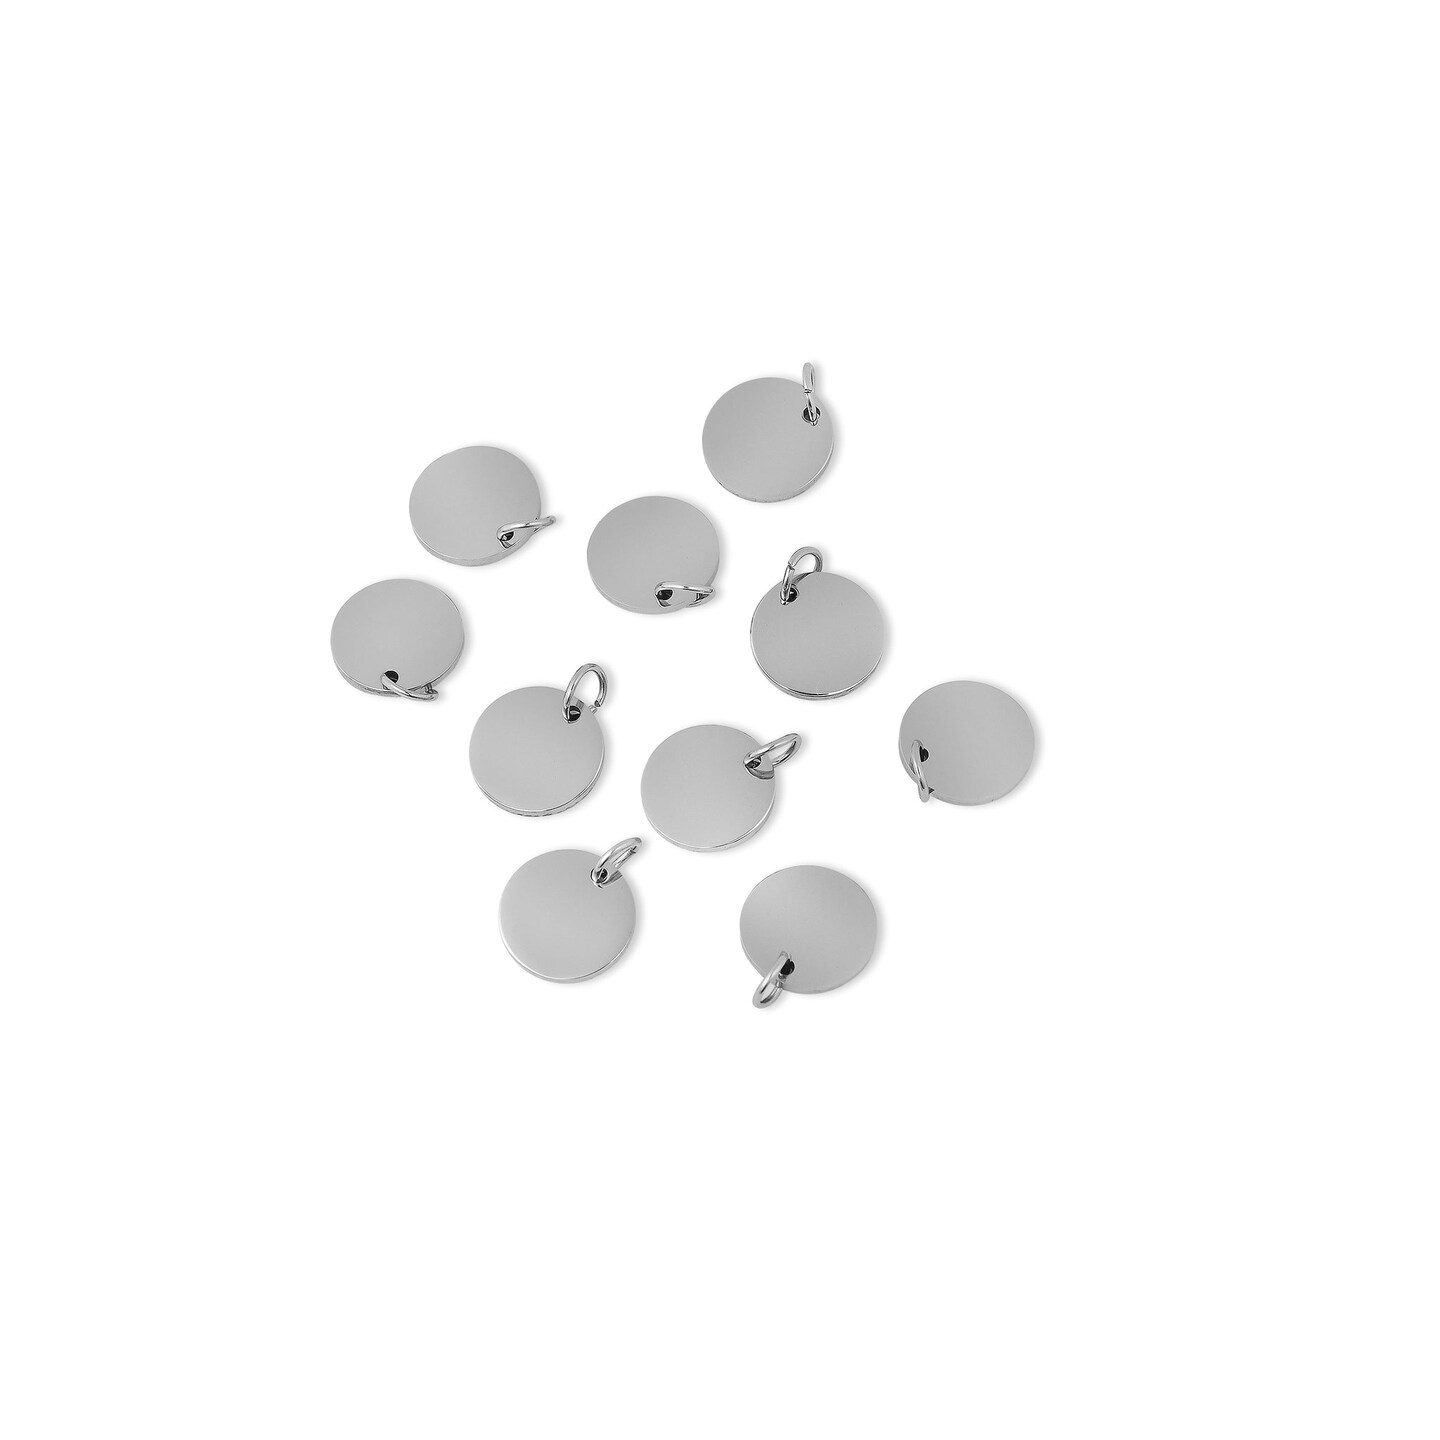 10 Pack - 13mm Blank Round Polished Stainless Steel Pendant